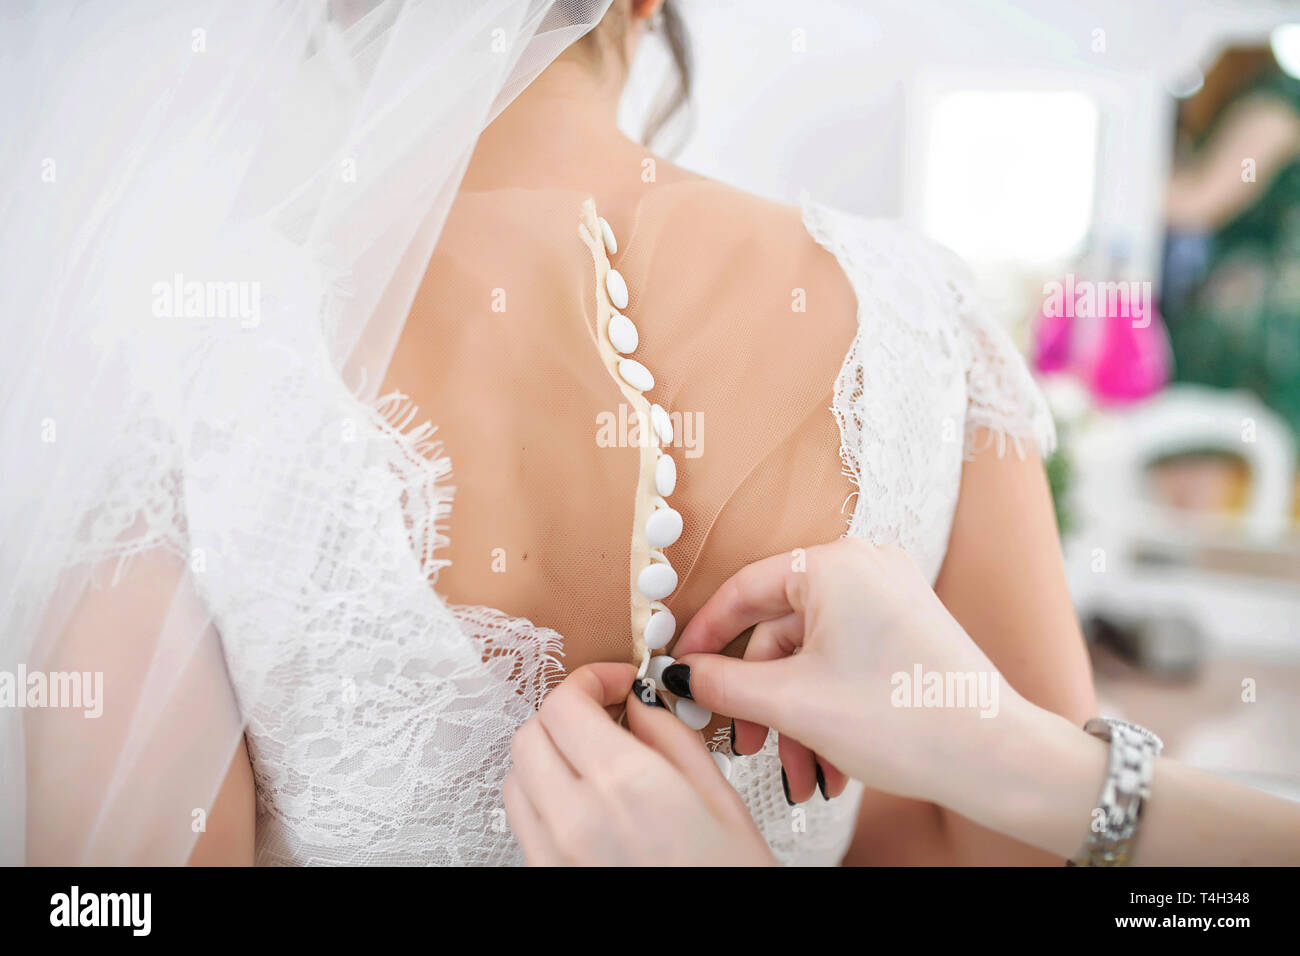 Bridesmaid or maid of honor helping the  bride buttoning up the lacy embroidered white dress at the back, in preparation for the wedding ceremony Stock Photo